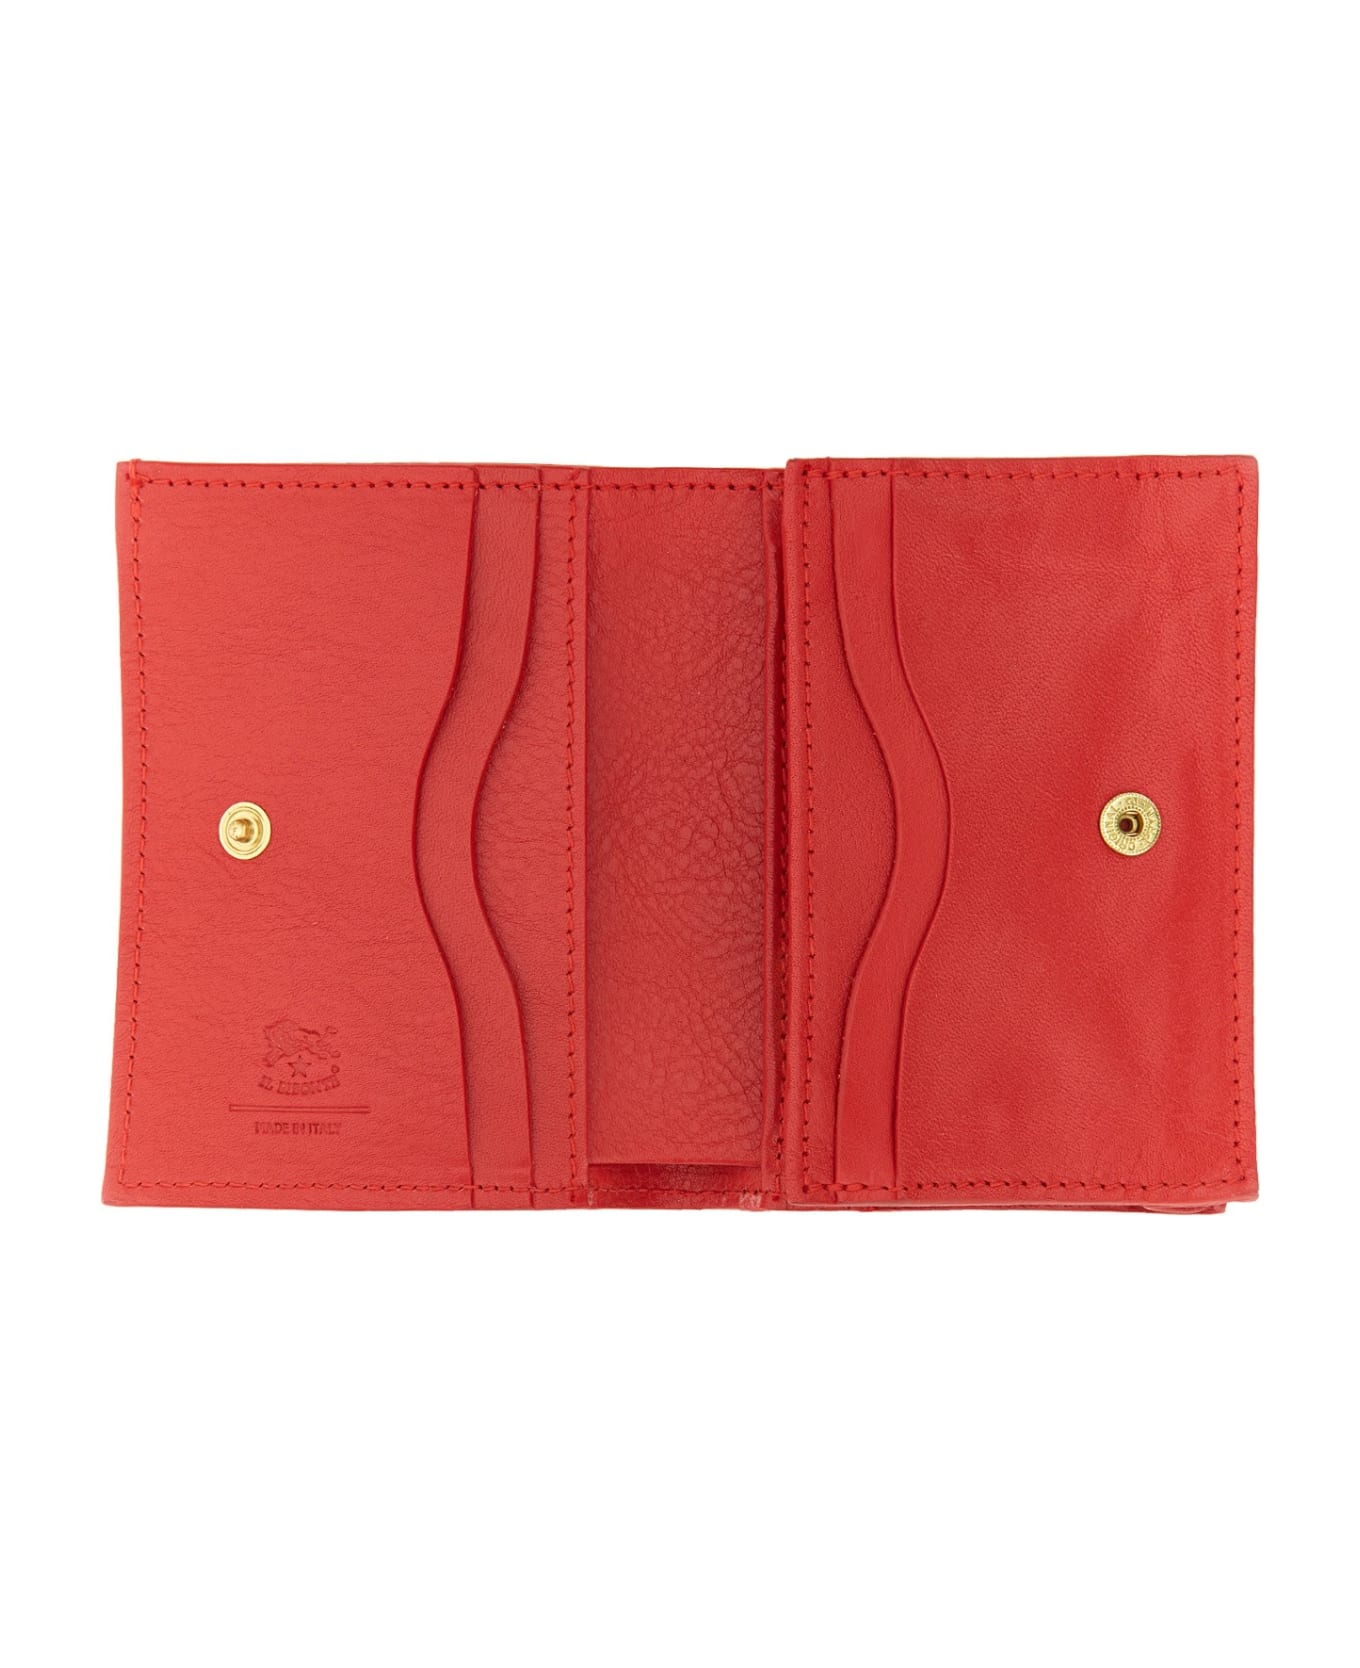 Il Bisonte Small Leather Wallet - ROSSO